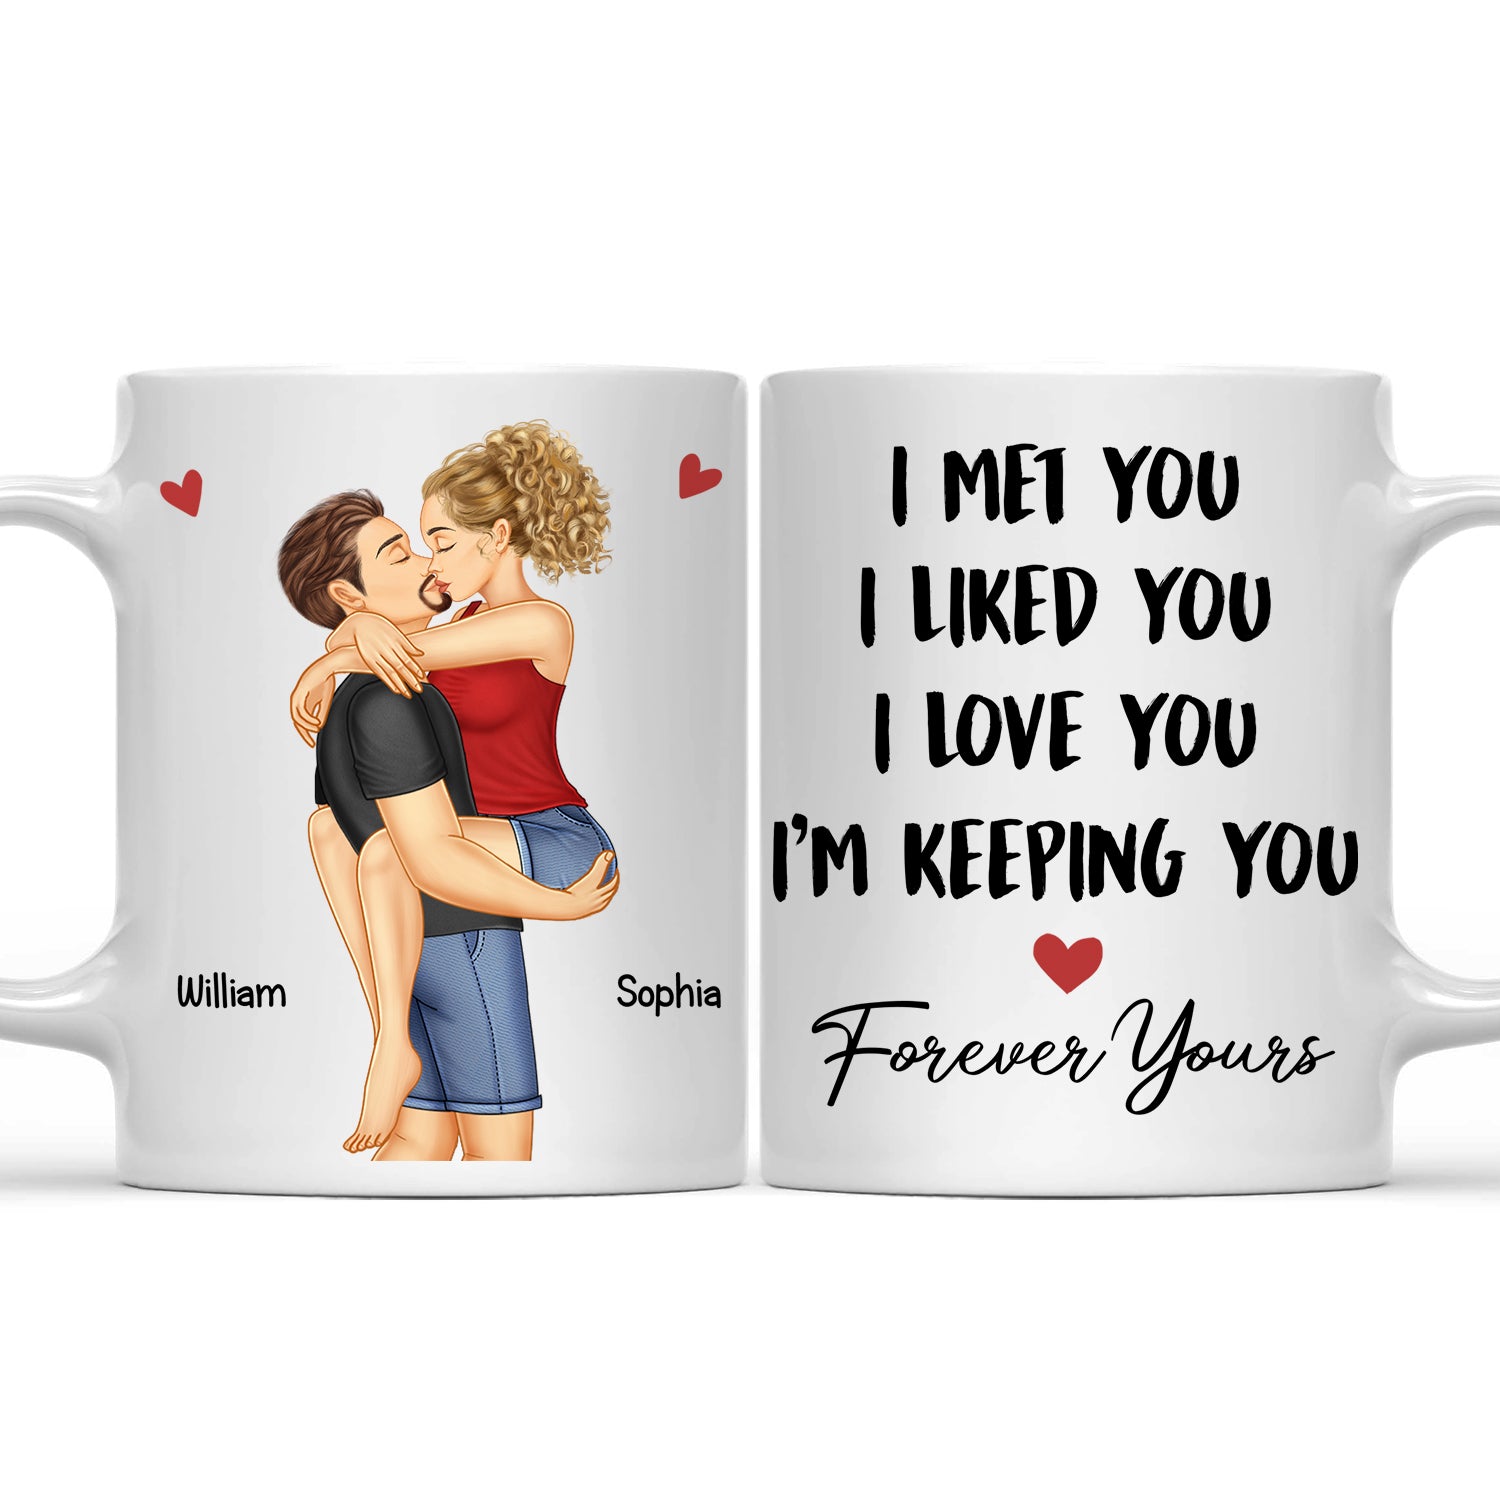 I Met You I Liked You I Love You Keeping You - Birthday, Loving, Anniversary Gift For Spouse, Hubby, Wifey, Boyfriend, Girlfriend, Couple - Personalized Mug